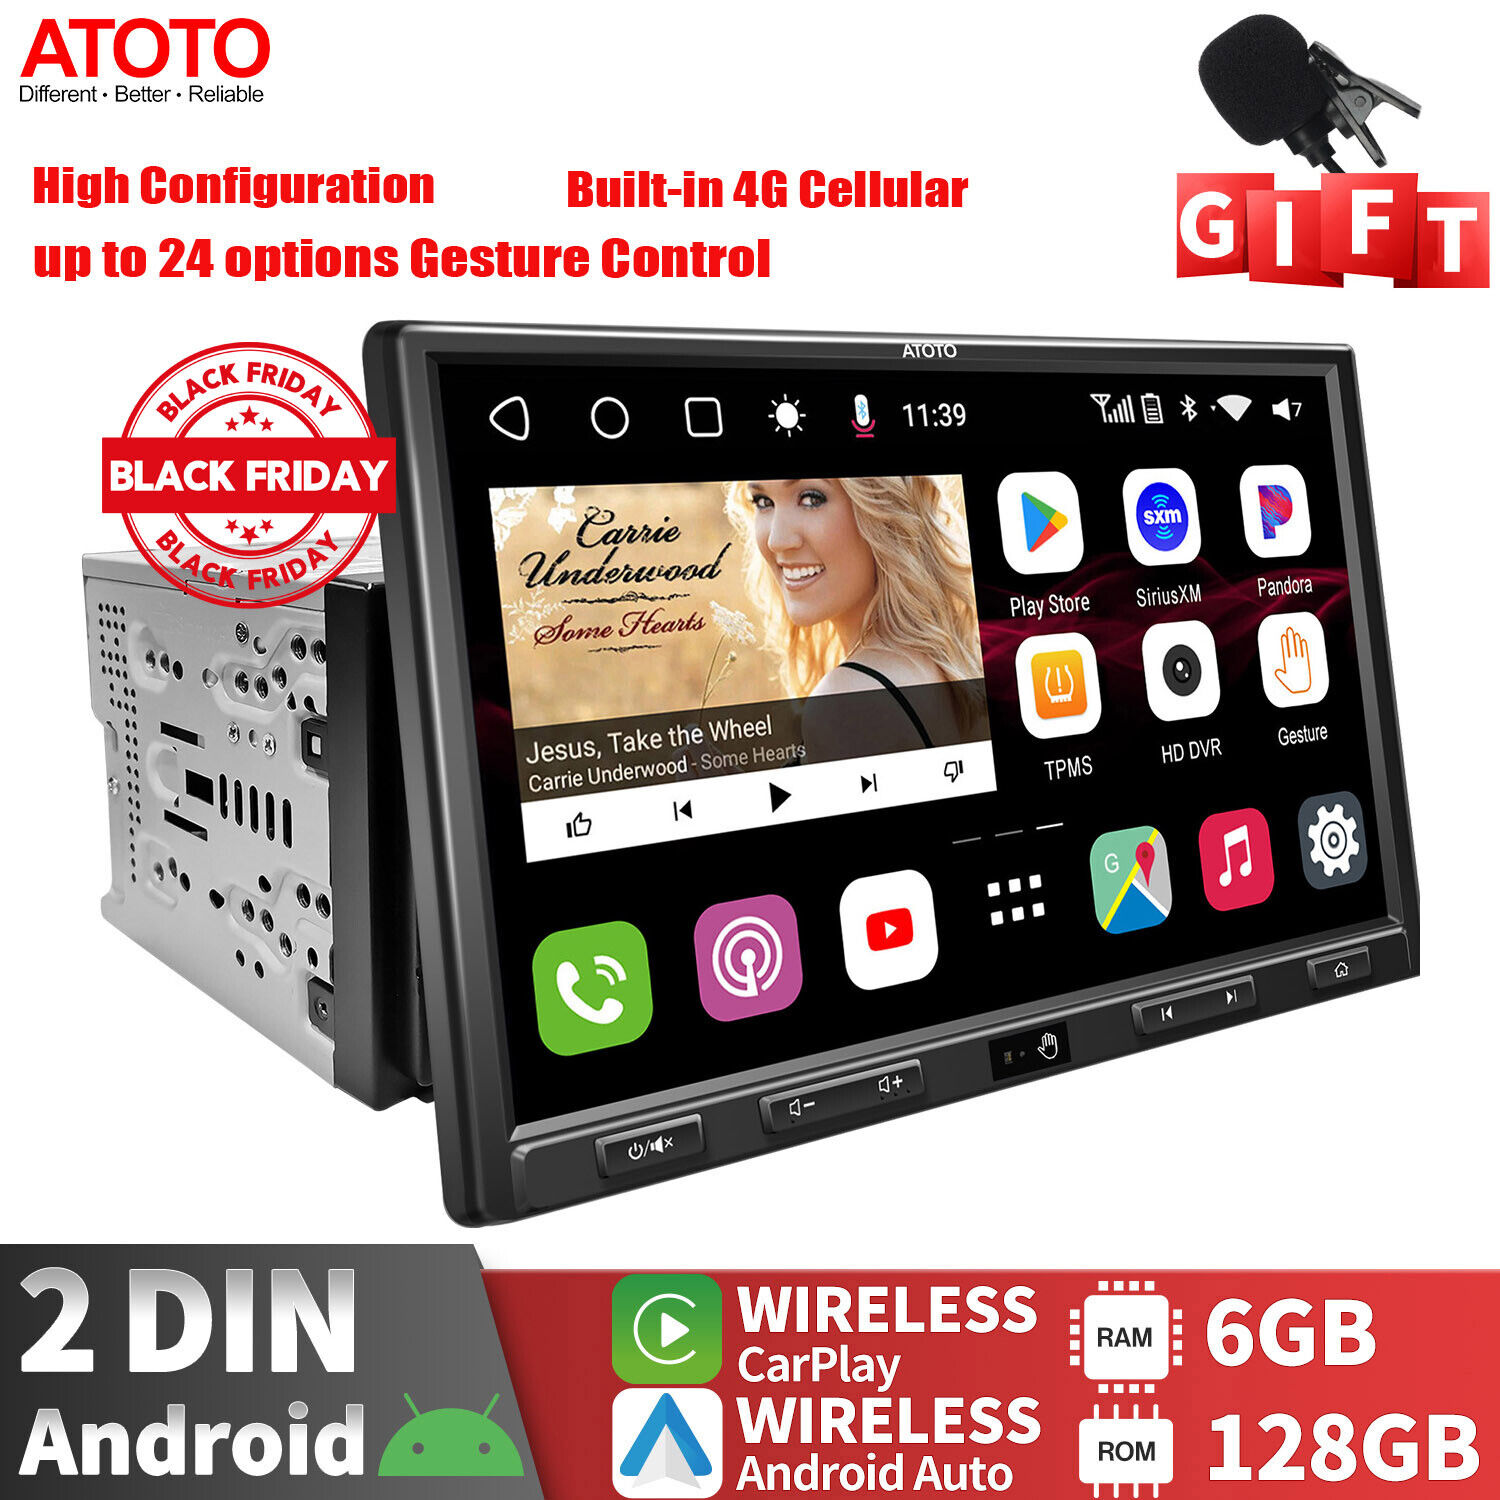 ATOTO S8 Ultra Plus 10.1in 2Din Car Stereo-6+128GB Gesture Operation Built-in 4G